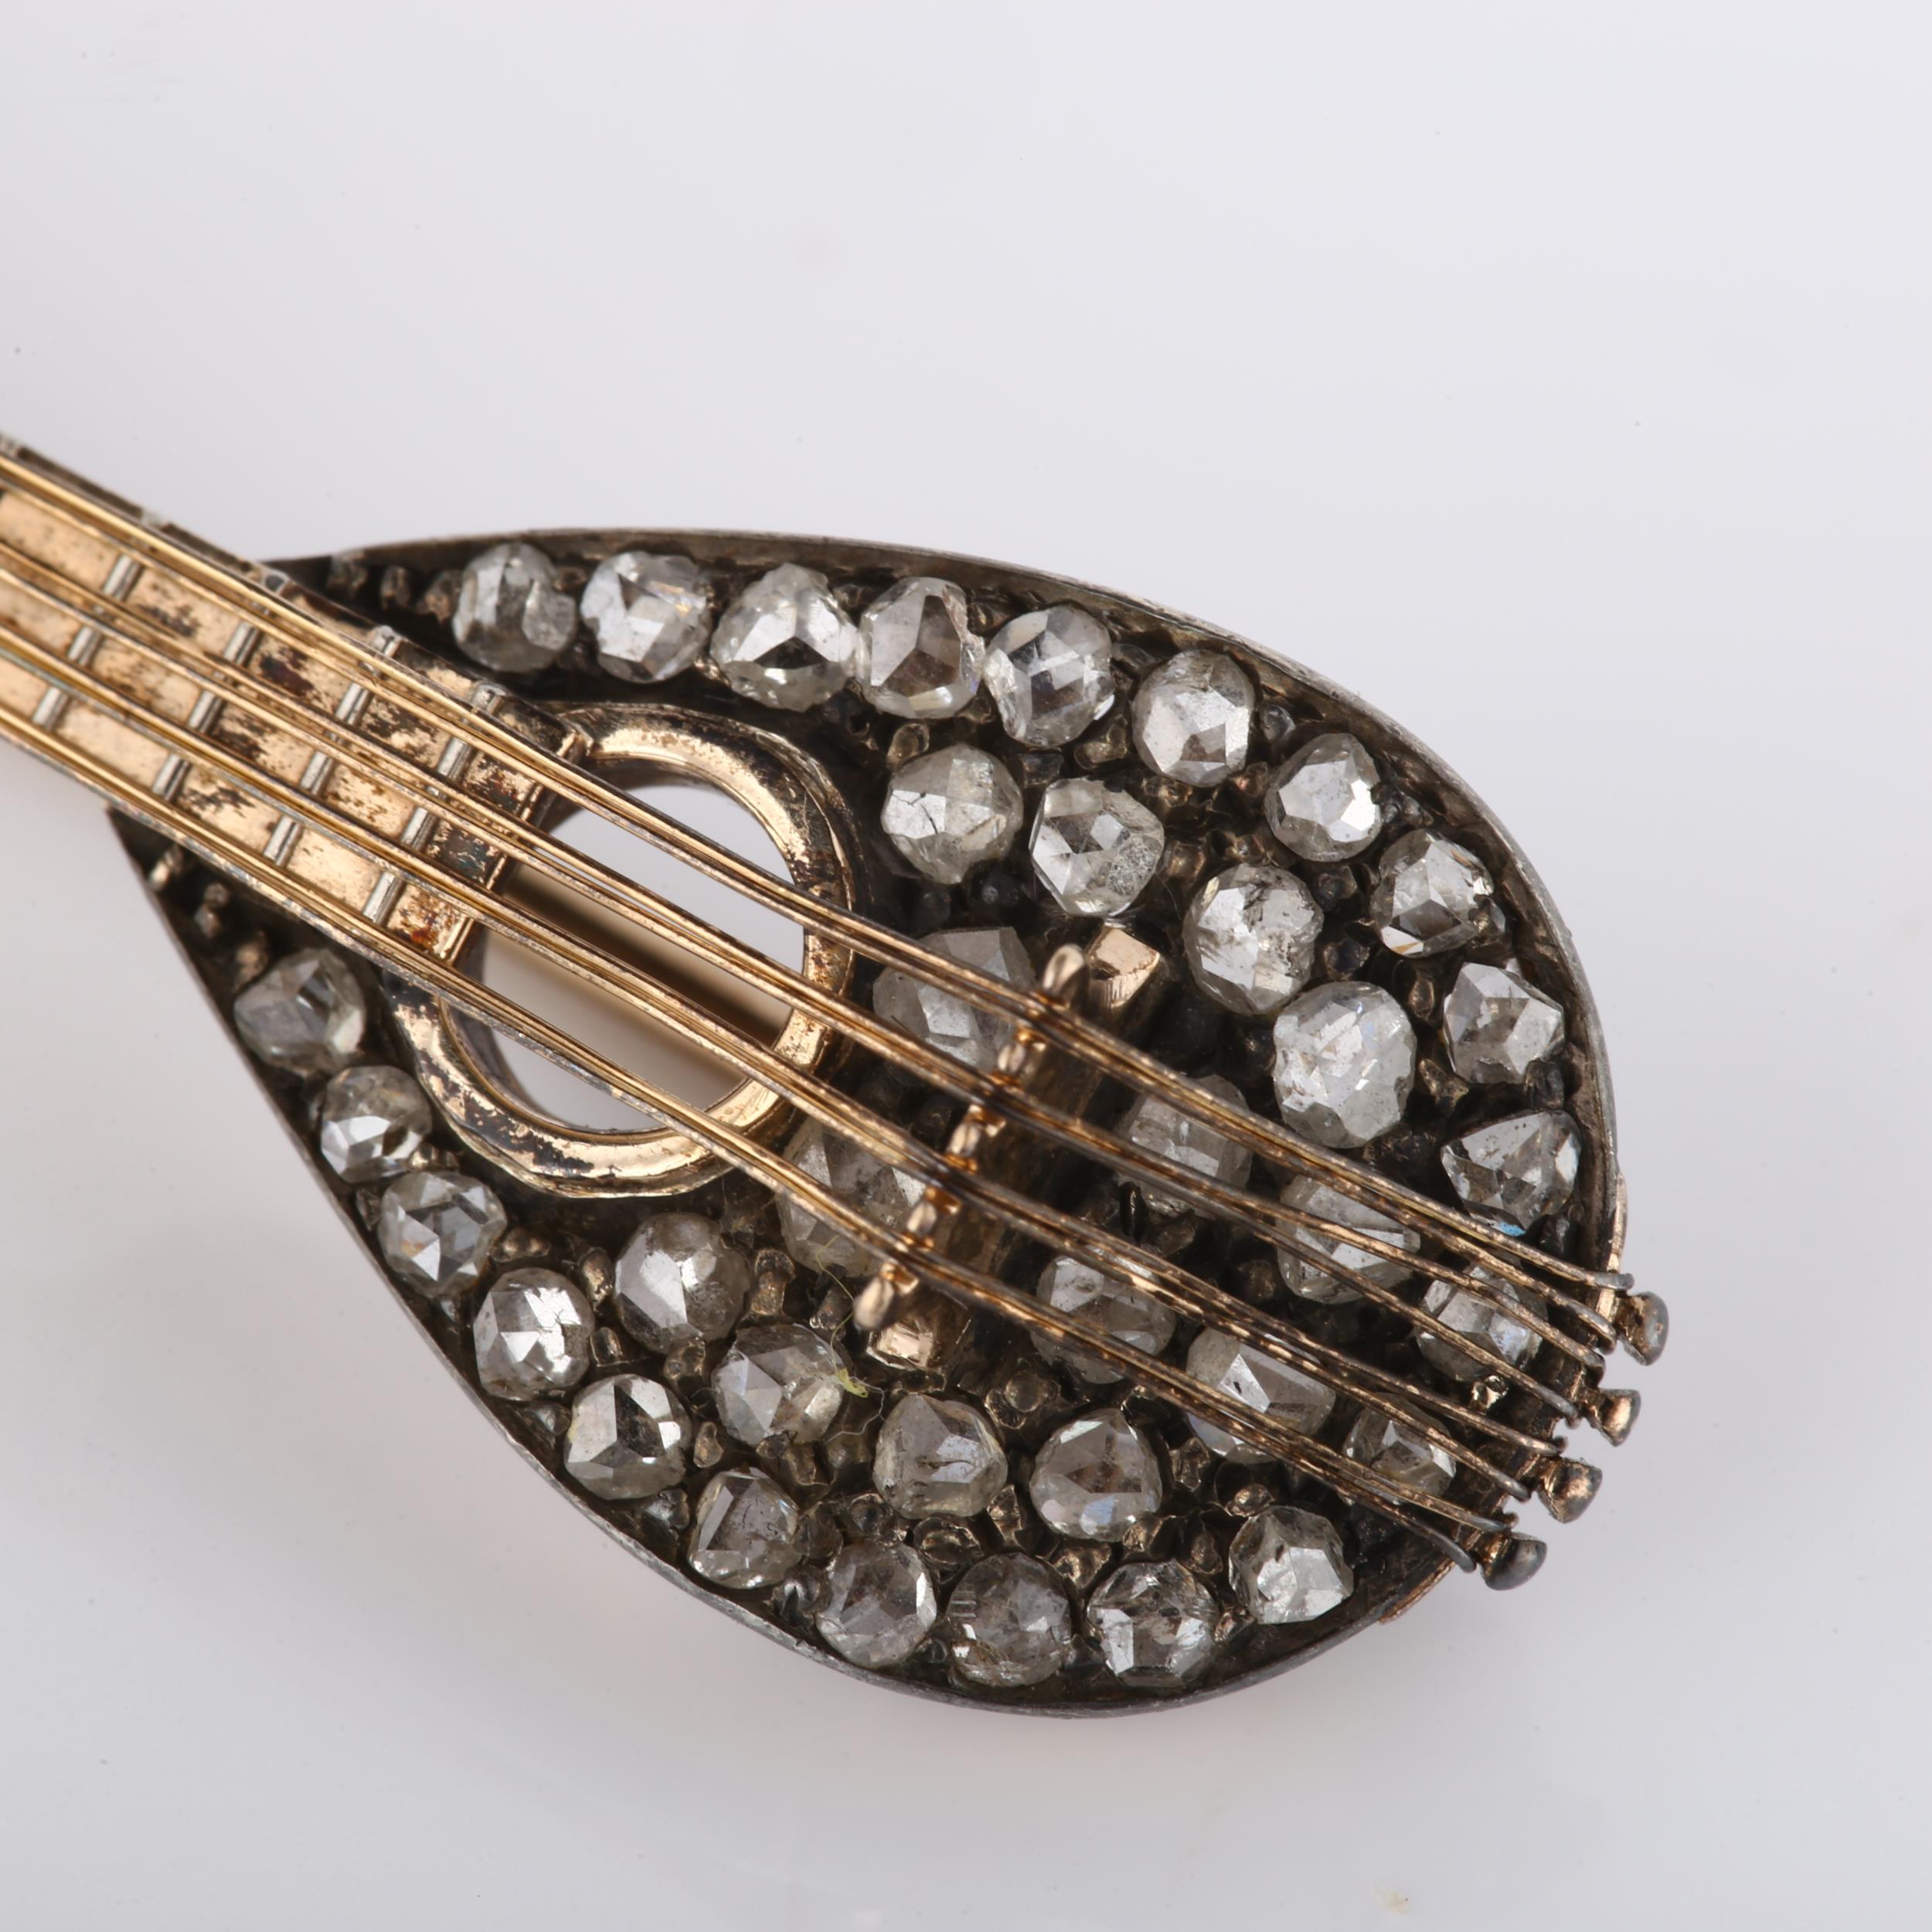 An Antique novelty diamond mandolin musical instrument brooch, circa 1900, unmarked rose gold and - Image 2 of 4